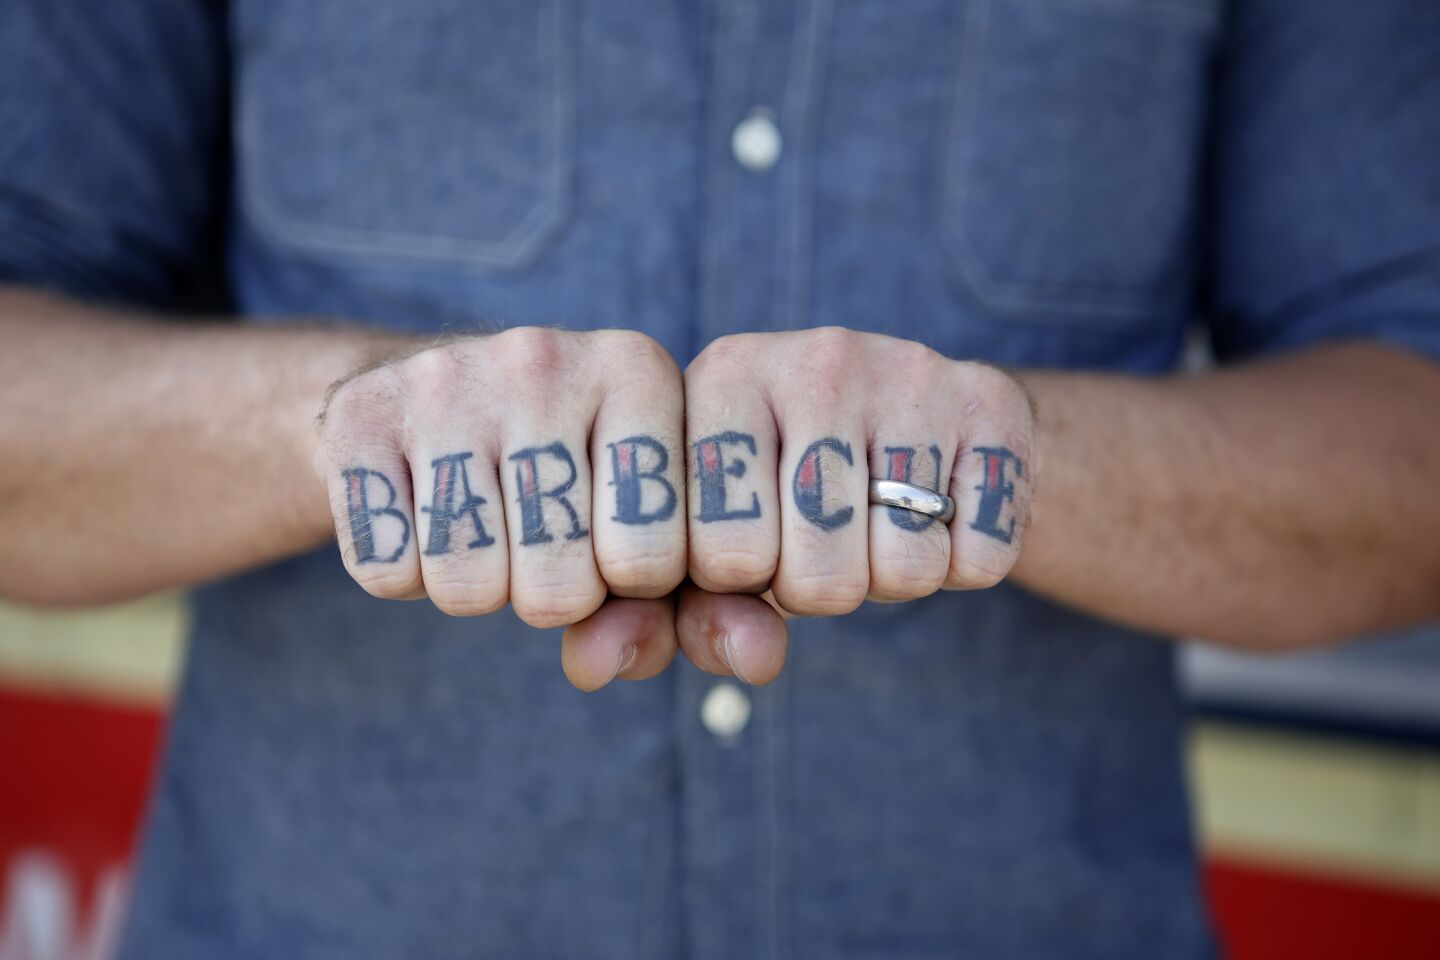 It's on the menu -- and his fingers too: Chef Ryan Lamon shows off his tattoo in front of Peaches' food truck.